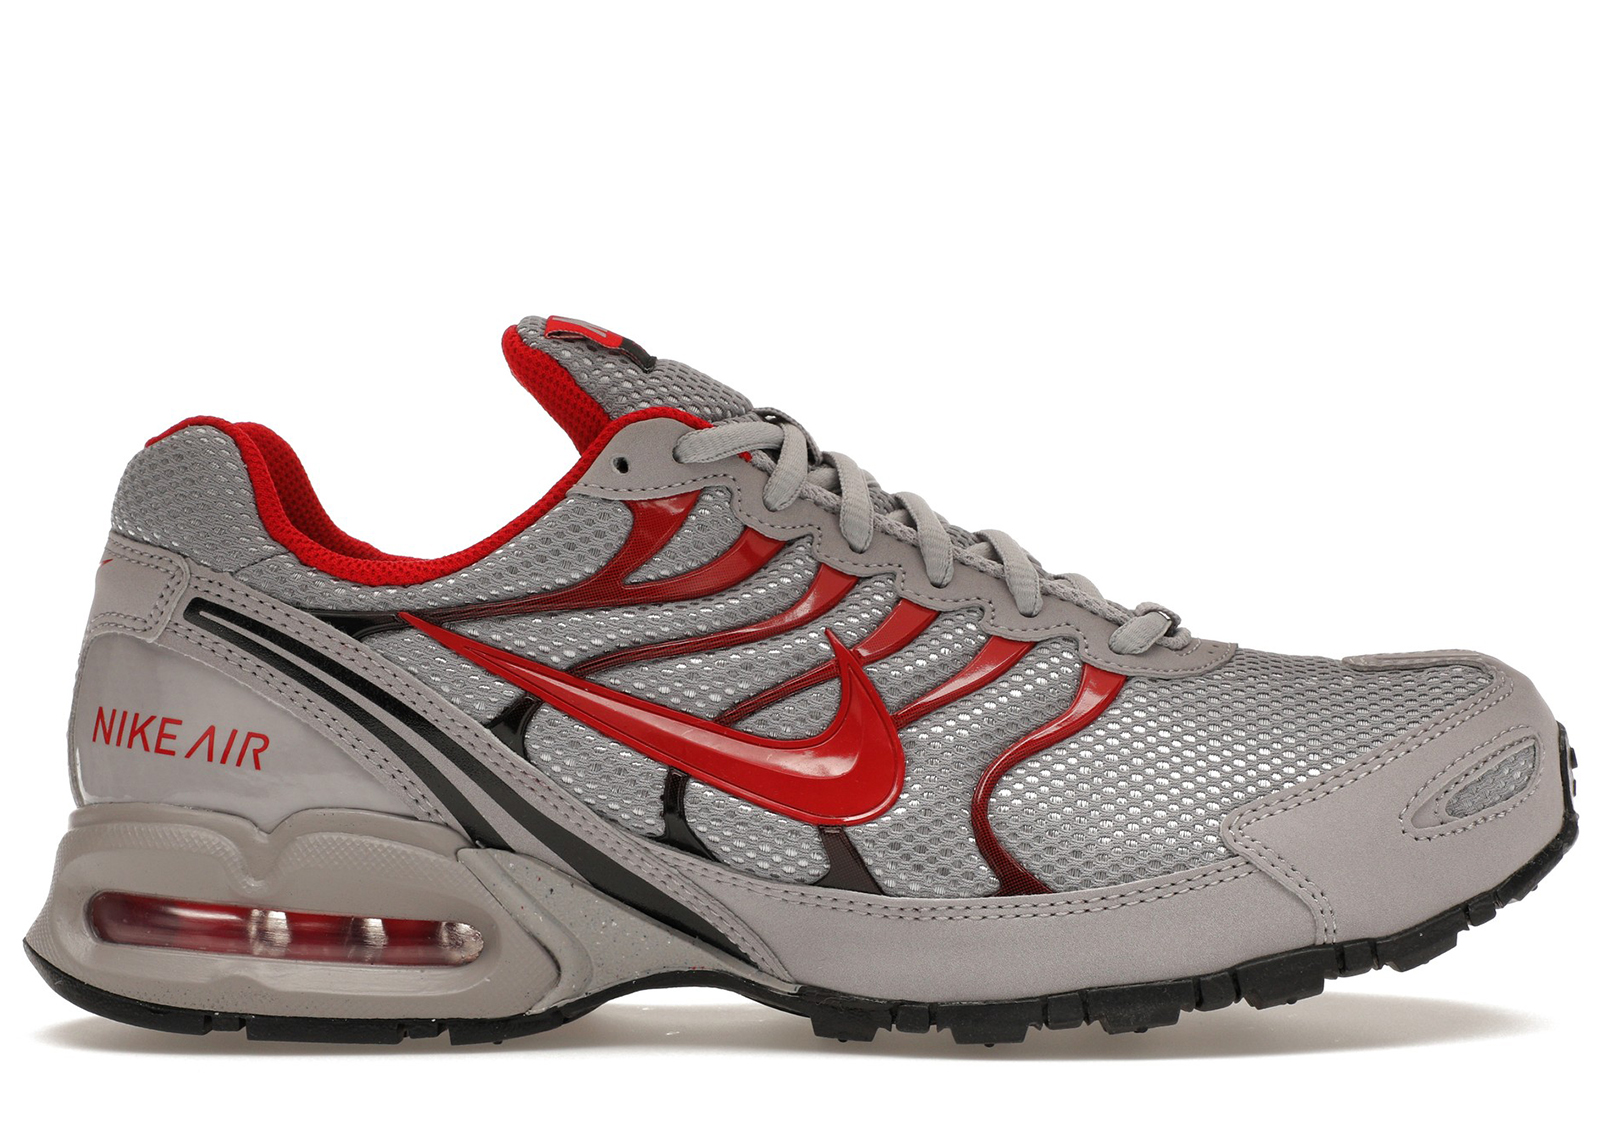 Nike Air Max Torch 4 Atmosphere Grey University Red